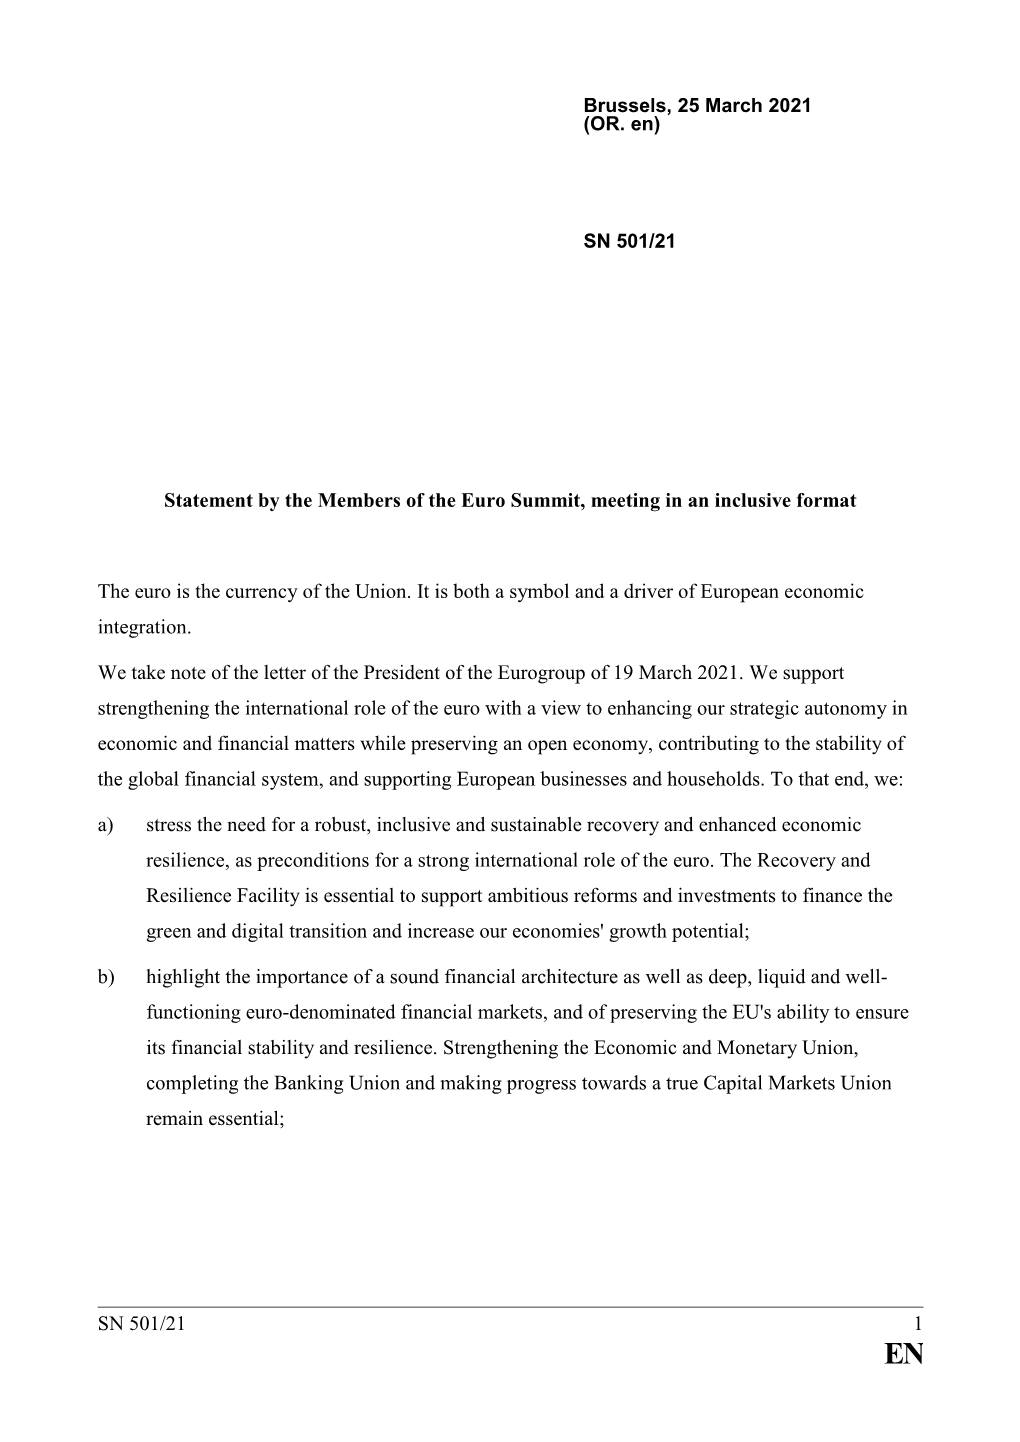 SN 501/21 1 Statement by the Members of the Euro Summit